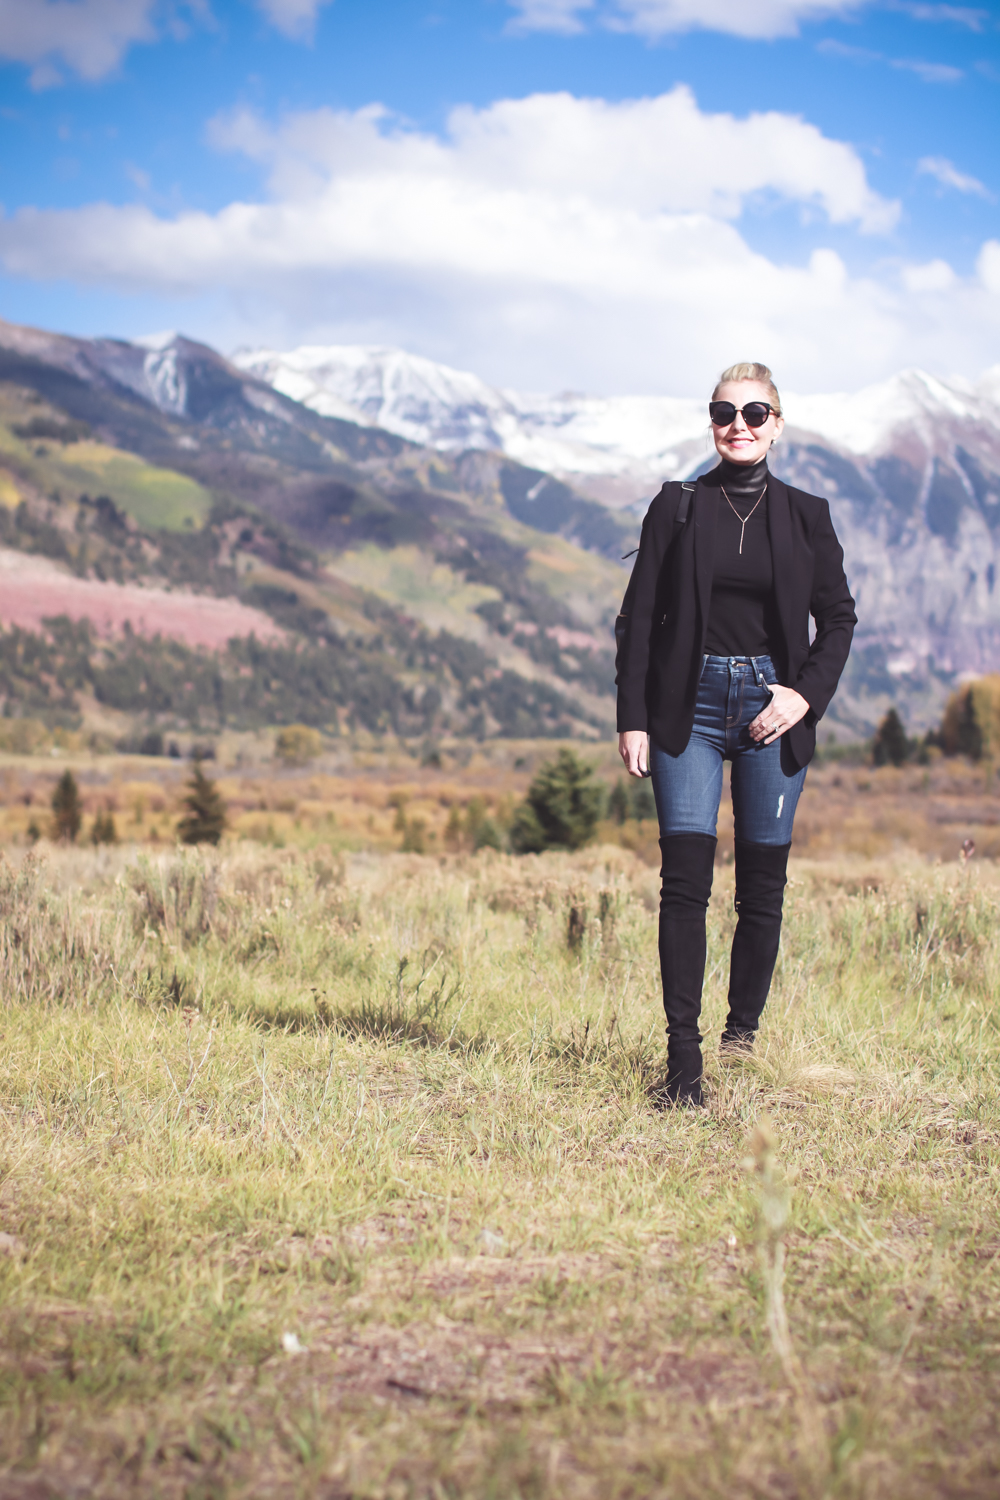 Tall Boots, over the knee boots, how to wear otk boots if you are tall or petite, featuring fashion blogger, Erin Busbee of Busbee Style in Telluride, Colorado, wearing Stuart Weitzman lowland boots 